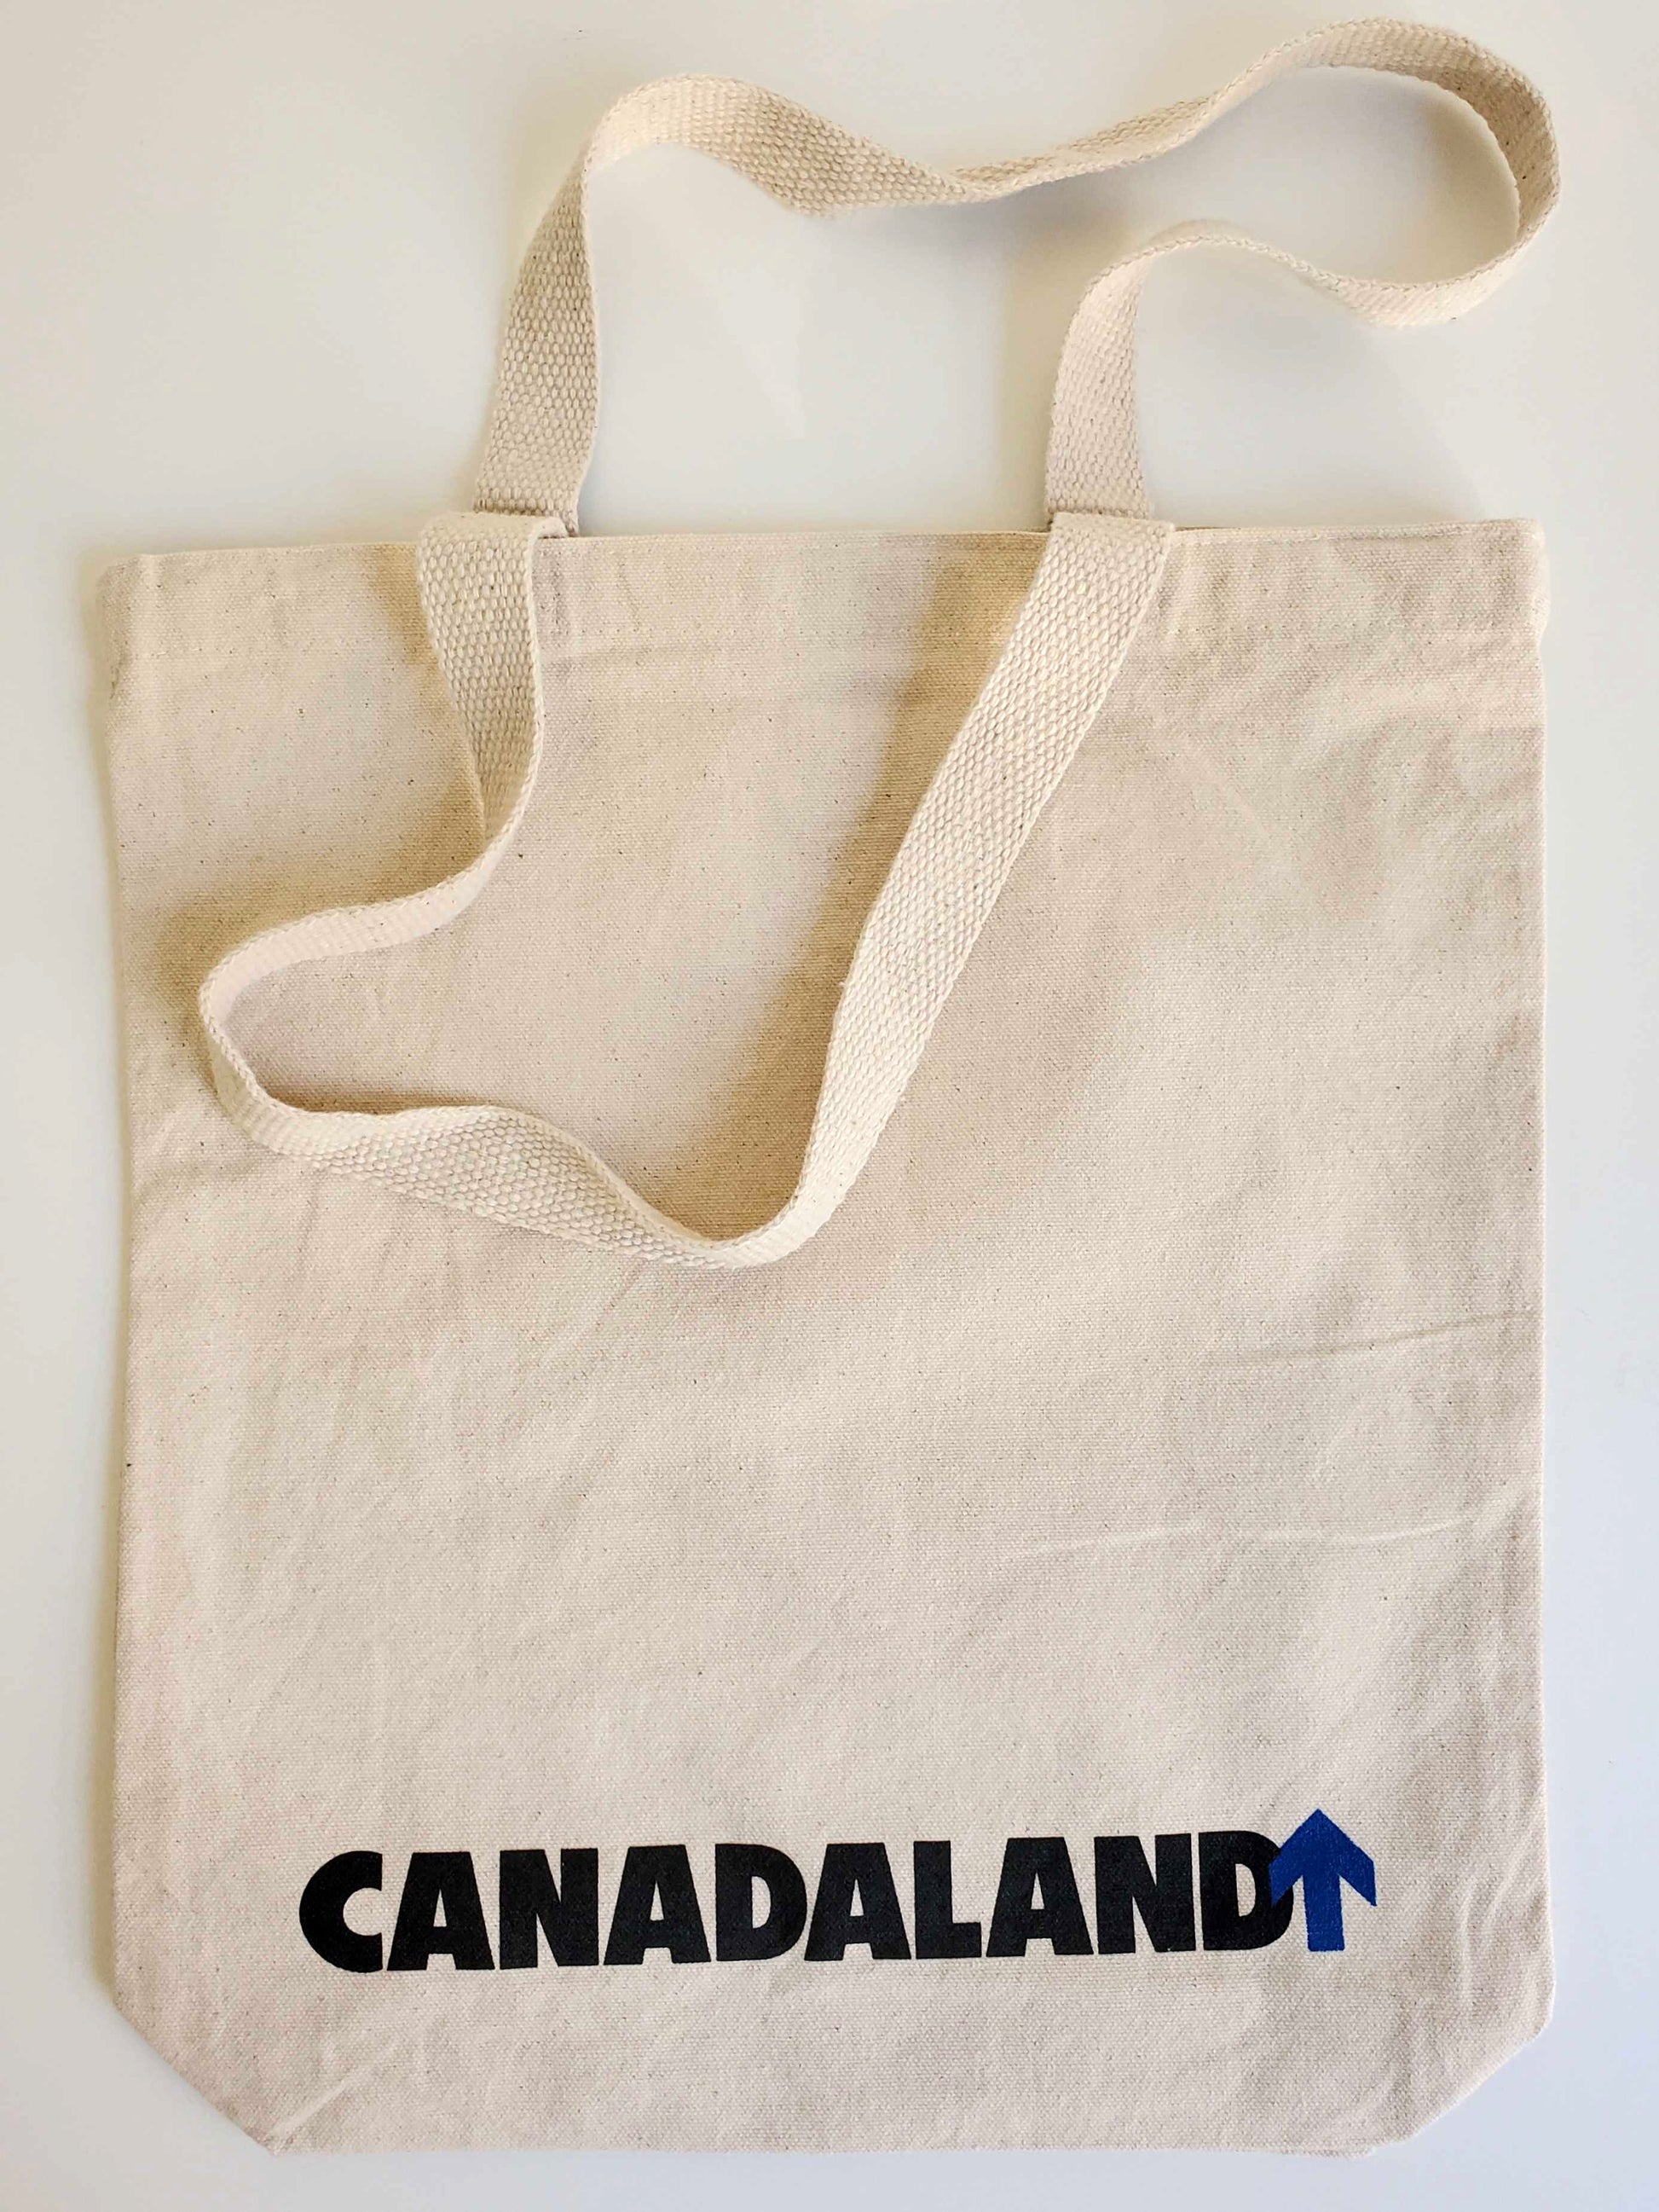 The back of the Duly Toted tote bag. The horizontal Canadaland logo in black and blue across the bottom.